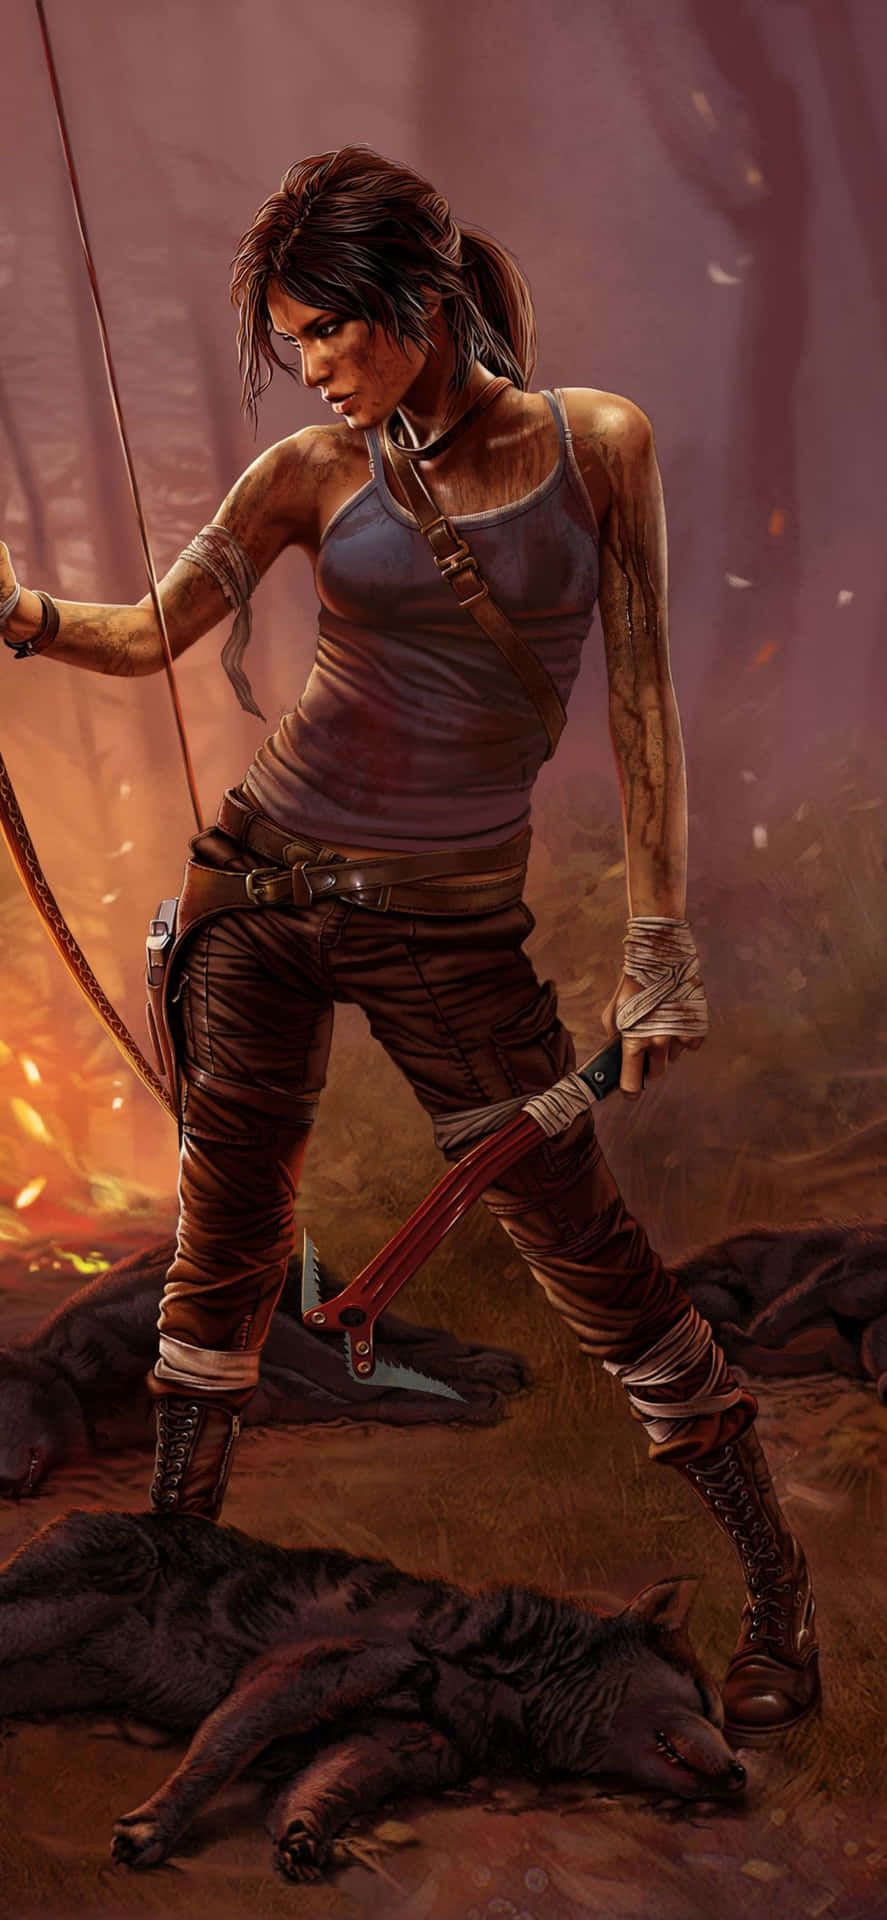 A Woman With A Bow And Arrow In Front Of A Fire